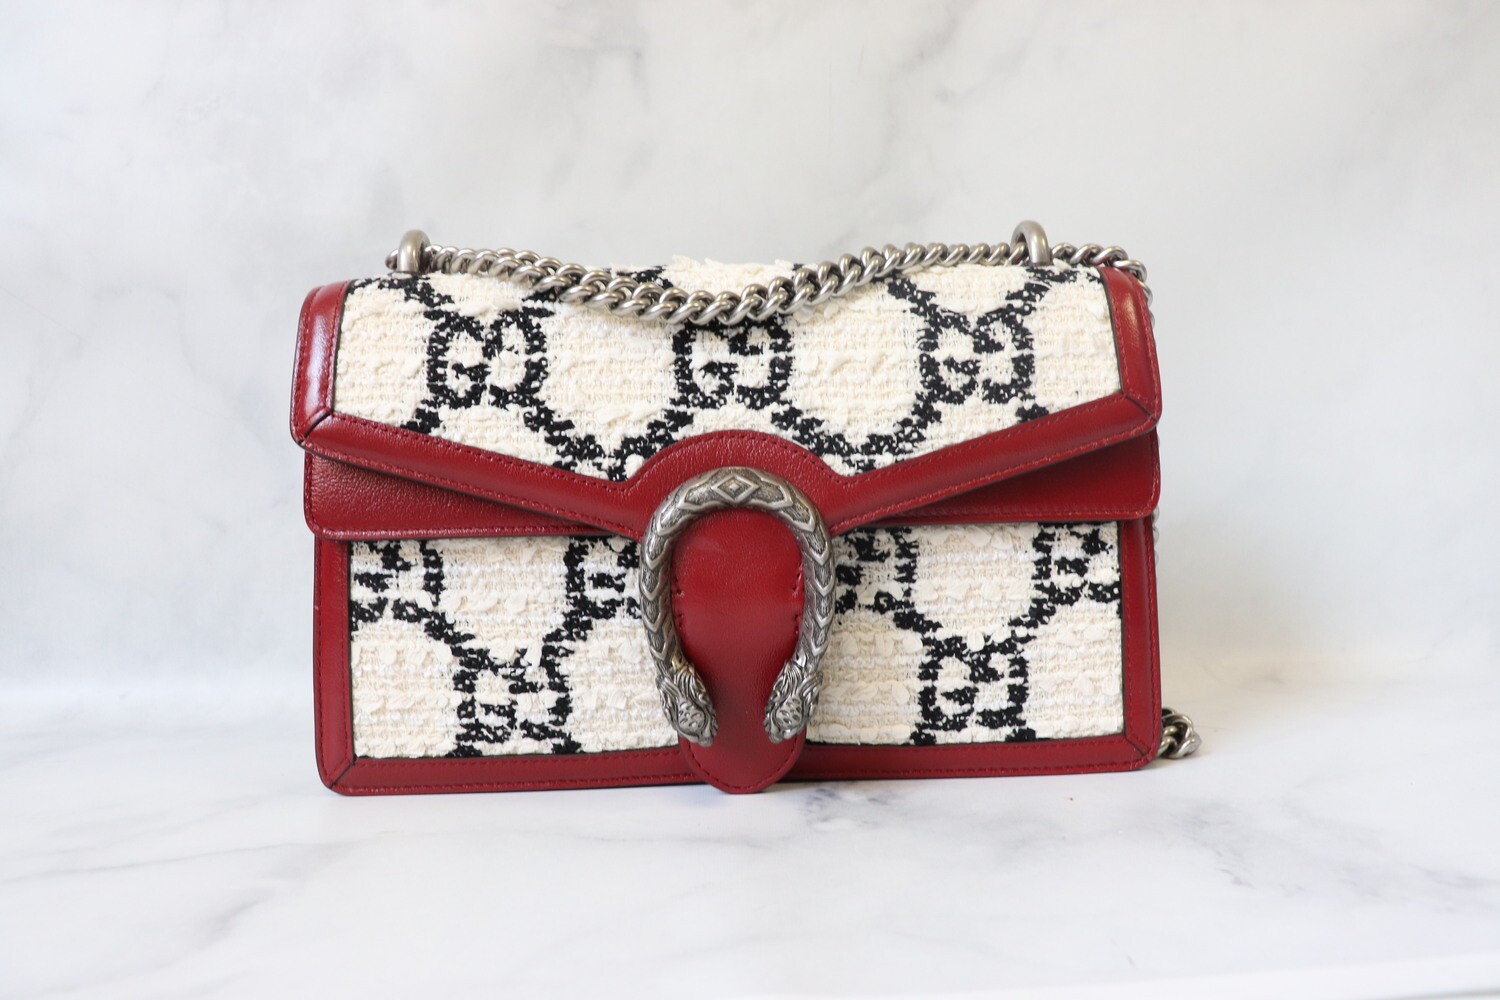 Gucci Dionysus Small Black, Red, White Tweed, New in Dustbag